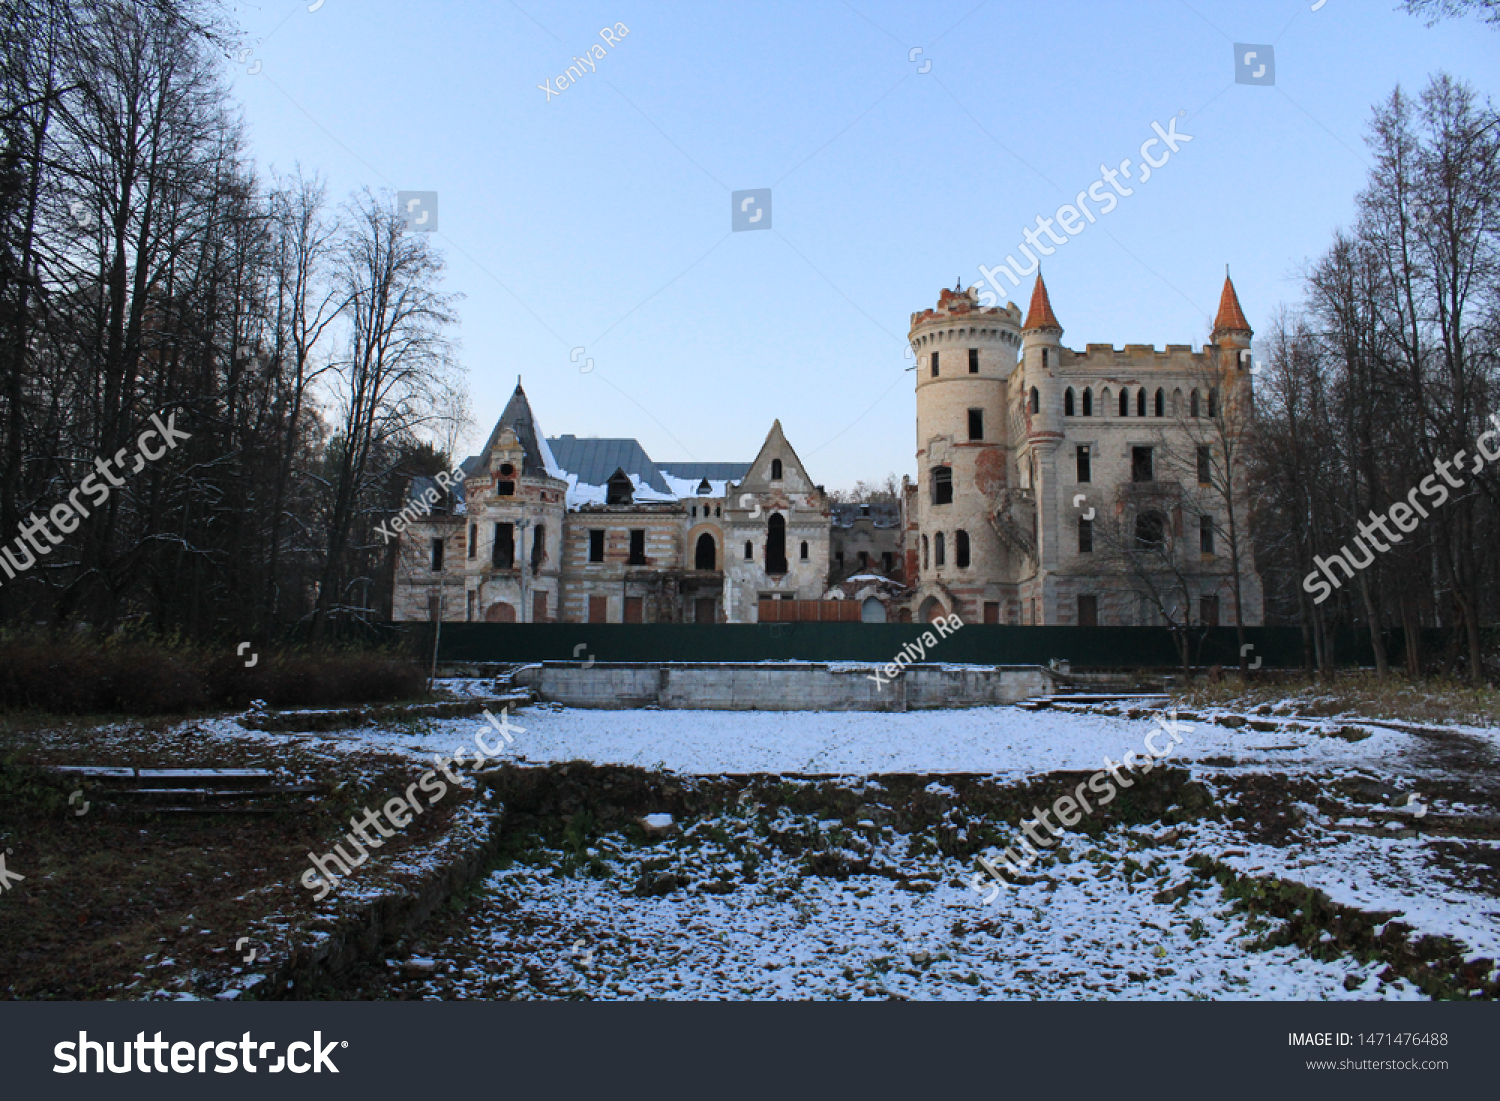 Winter landscape with crumbling castle on the background of grass covered with snow #1471476488